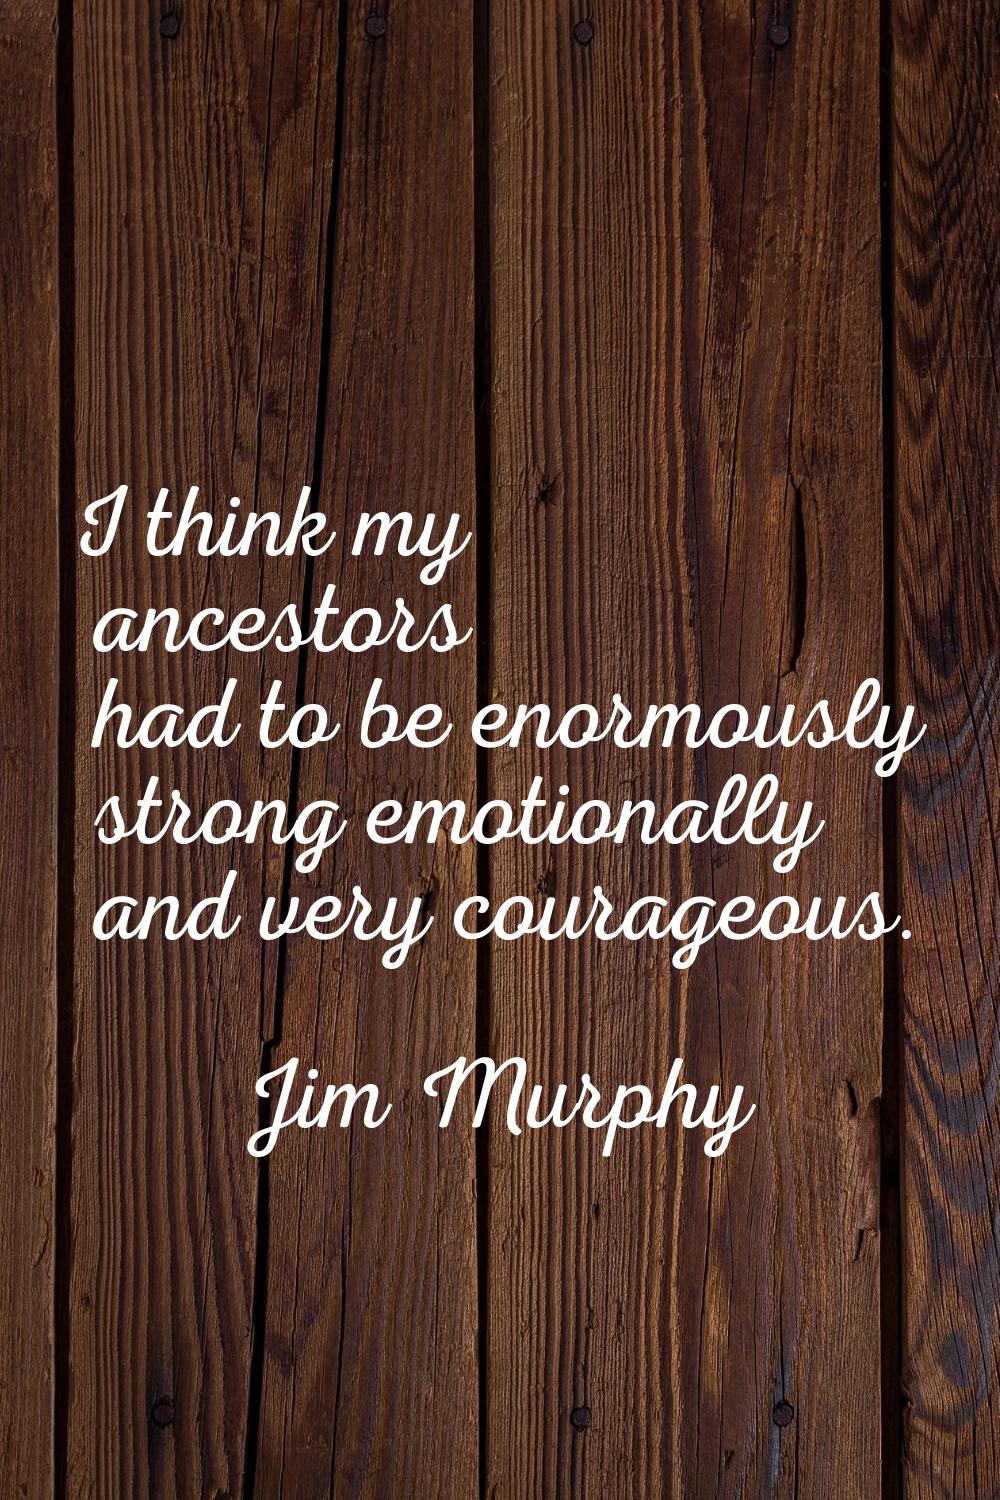 I think my ancestors had to be enormously strong emotionally and very courageous.